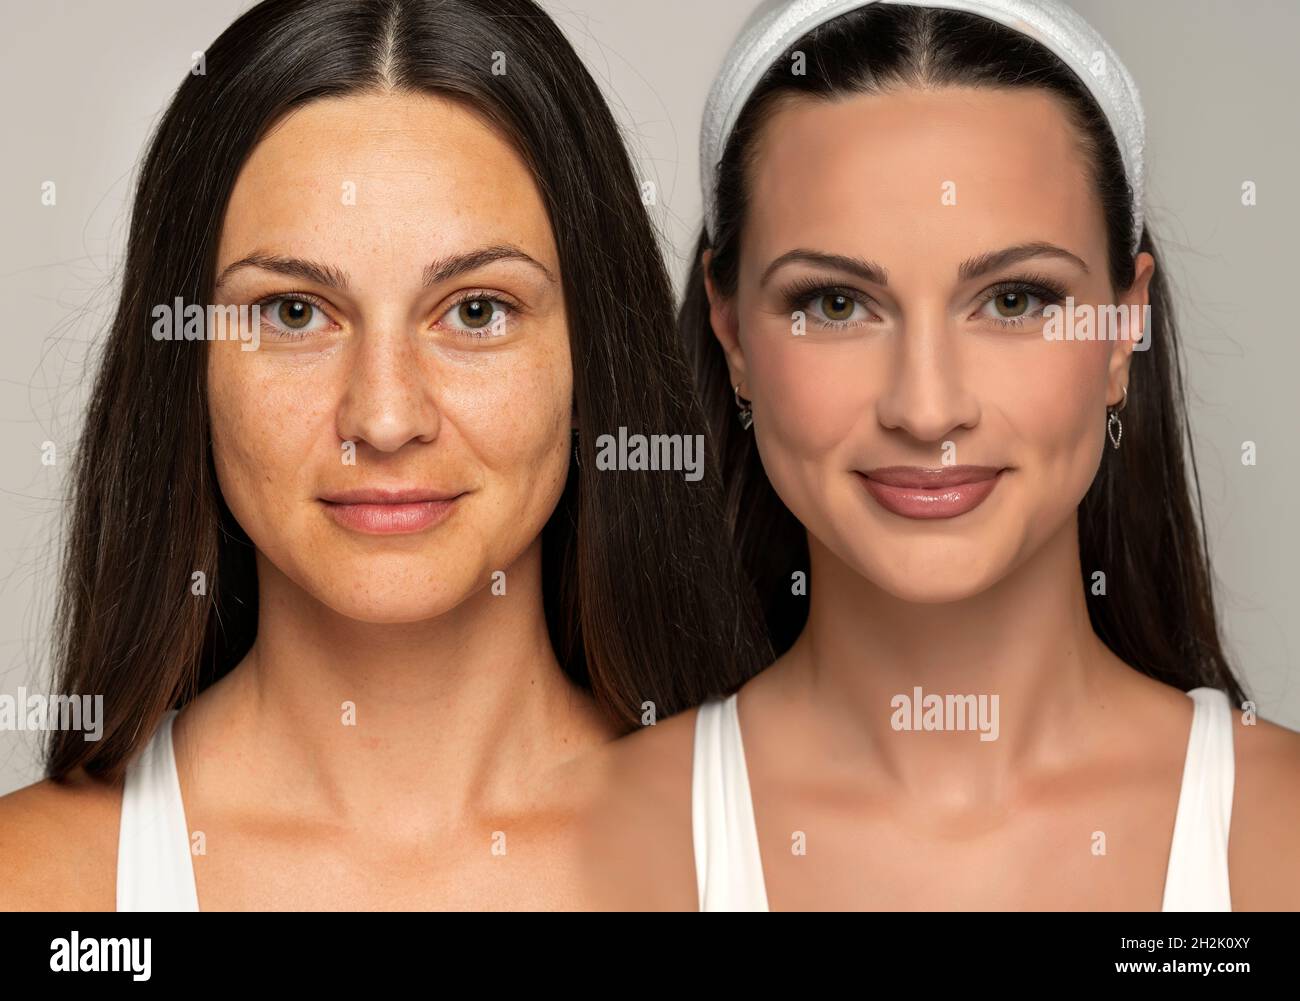 Comparison portrait of a woman without and with makeup on a gray background Stock Photo